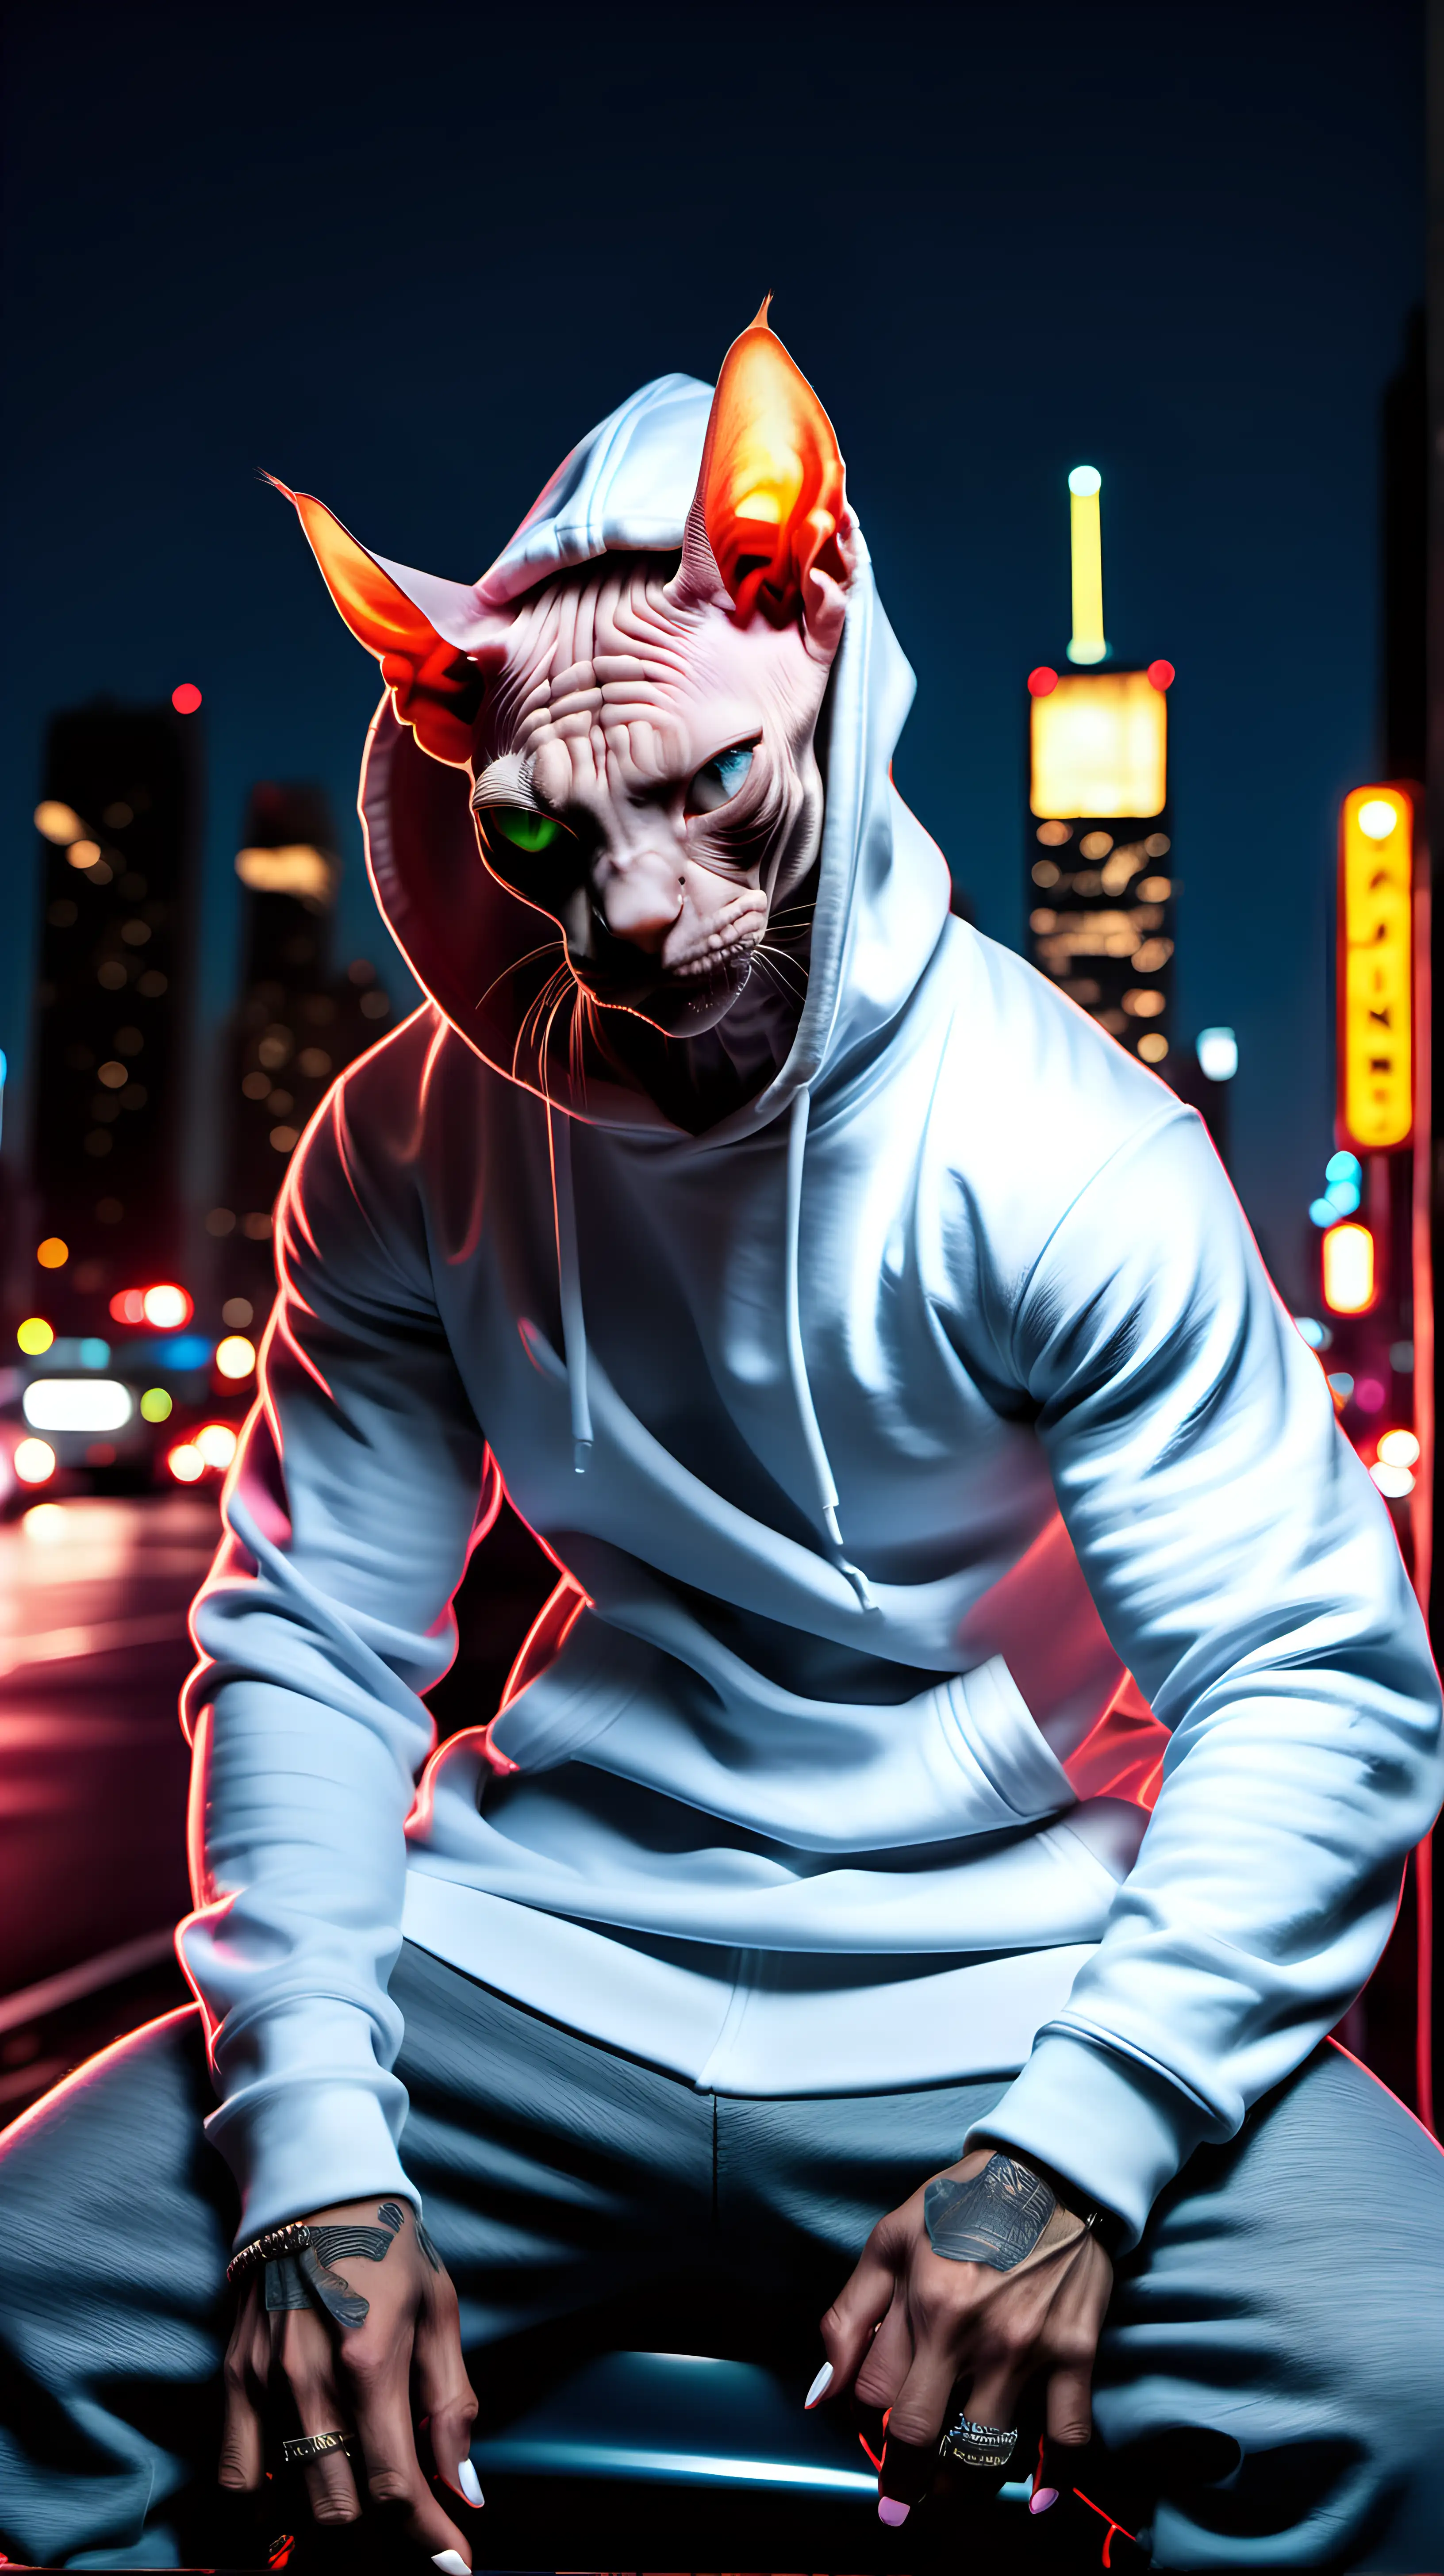 Sphynxcat on steriode, thug street life,clothing brand,big city like new york, crowdy busy futuristic city, neonlight, at night, musculaire, blink at camera, sitting on a carroof looking aggressively, give him a hoodie cut off slaves from  tve brand Jacks&Jones, sharp white nails..